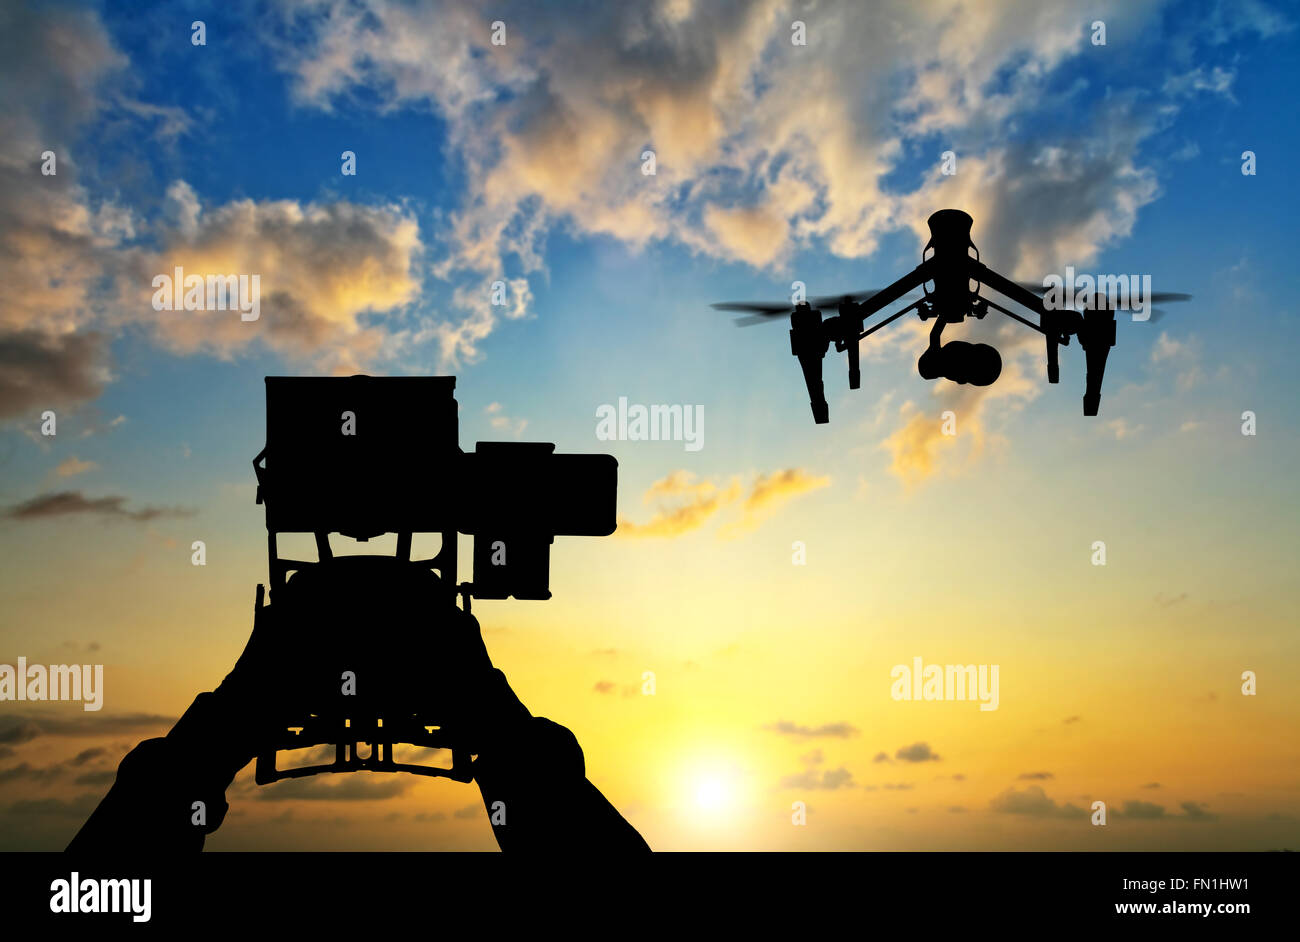 Man hands handling drone in sunset silhouettes Stock Photo